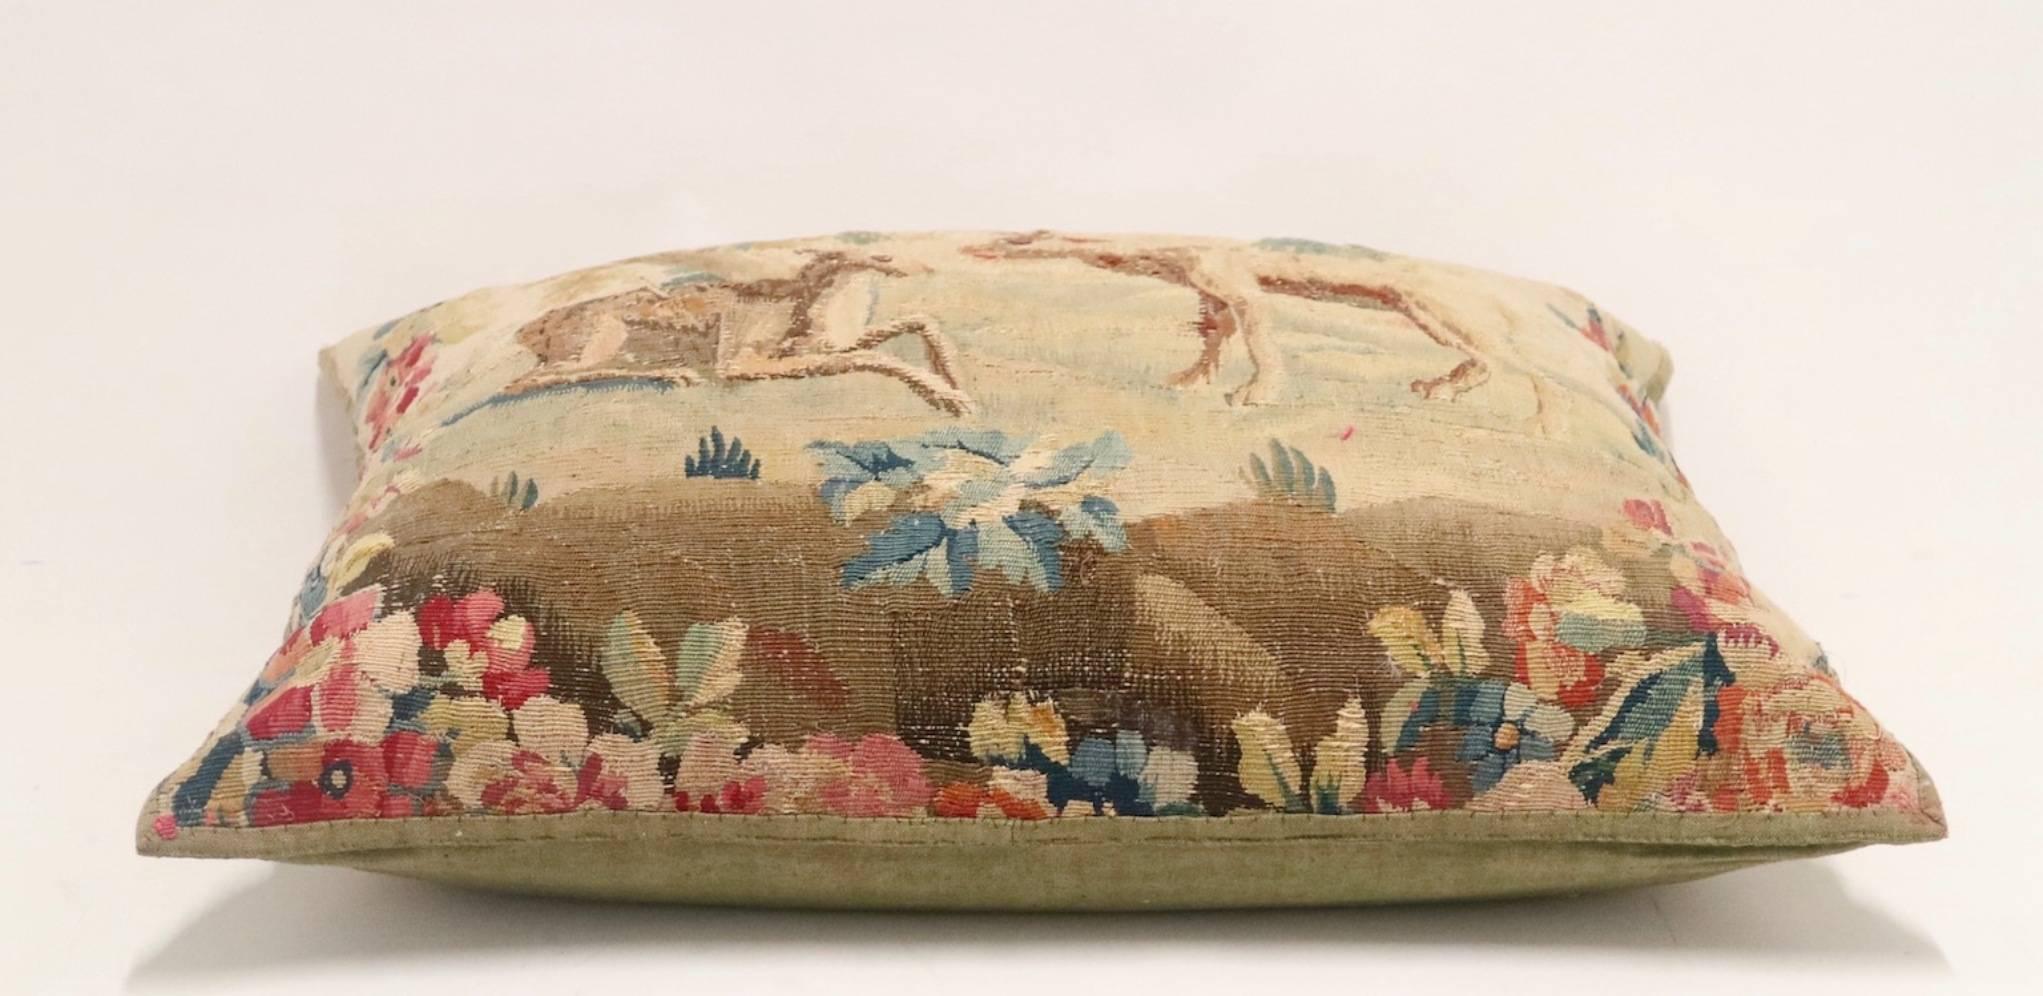 Flemish 17th century tapestry made into a pillow consisting of cotton and silk. The tapestry depicts two deer in a field with flowers and is completely handmade with the original linen intact on the pillow's verso. This item is in excellent antique